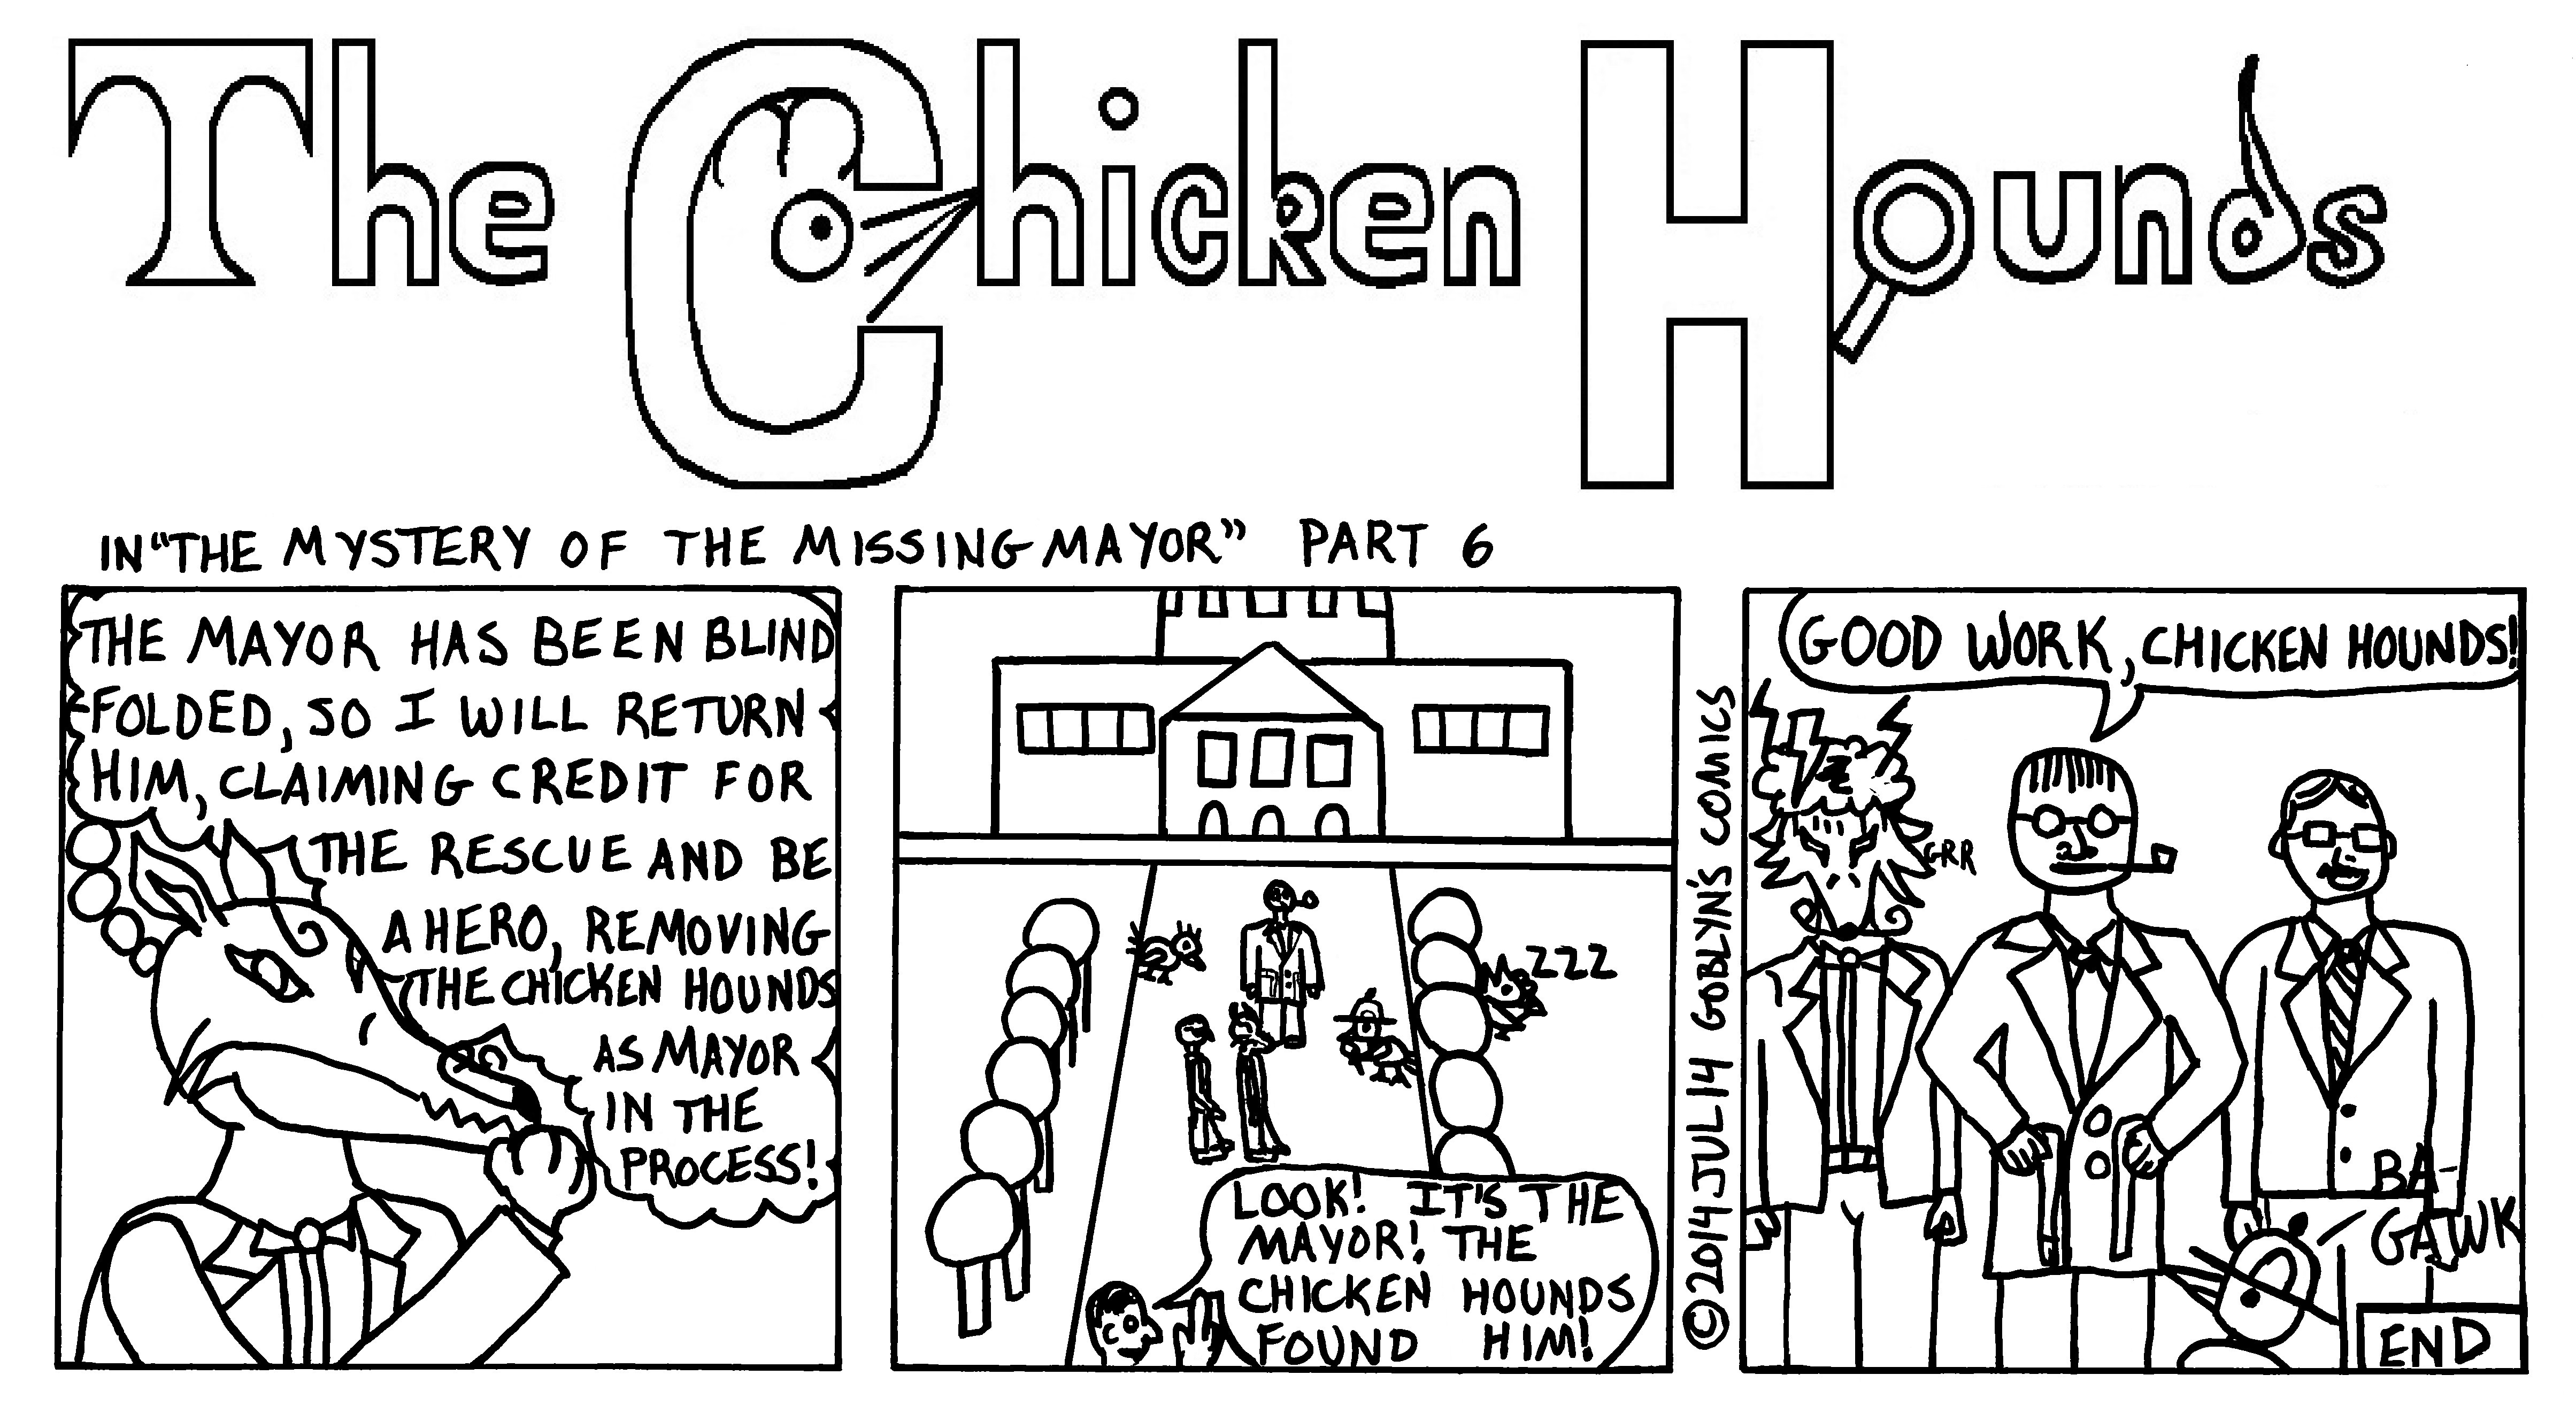 The Chicken Hounds, San Francisco's Greatest Detectives, in "The Mystery of the Missing Mayor" Part 6. Francisco Fox, nemesis of the Chicken Hounds. tries to take credit for rescuing the mayor but the Commissioner says "Good work, Chicken Hounds!"